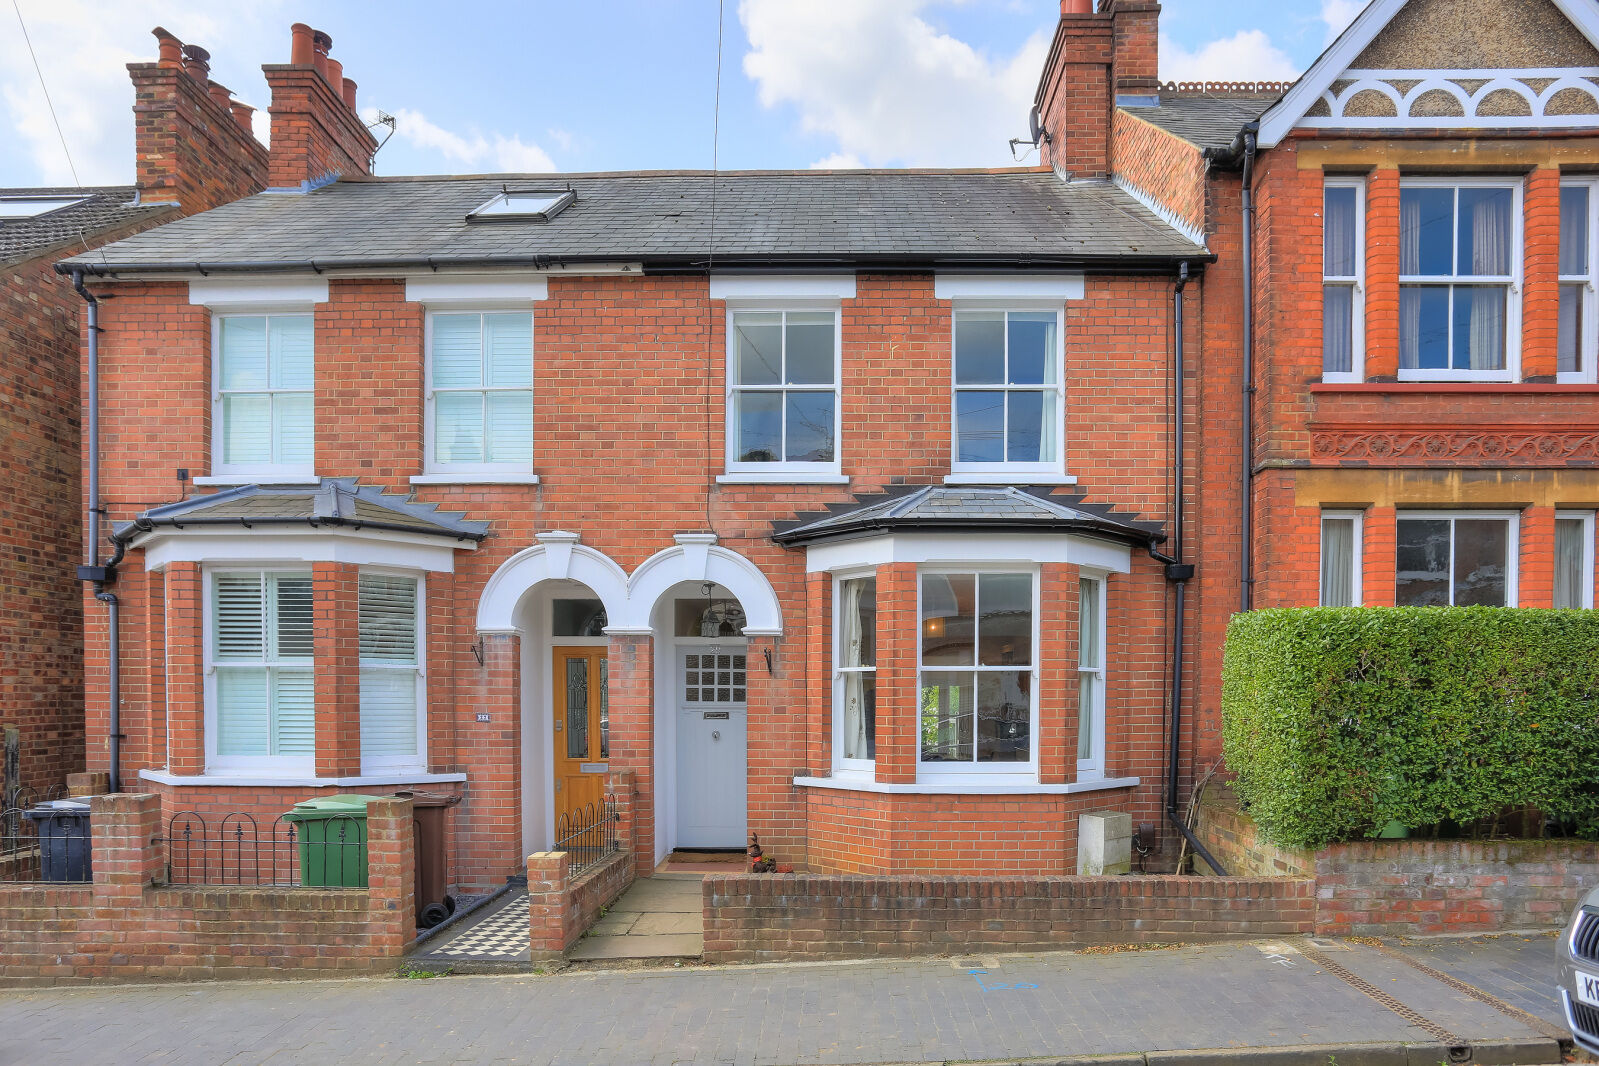 4 bedroom semi detached house for sale Paxton Road, St Albans, AL1, main image